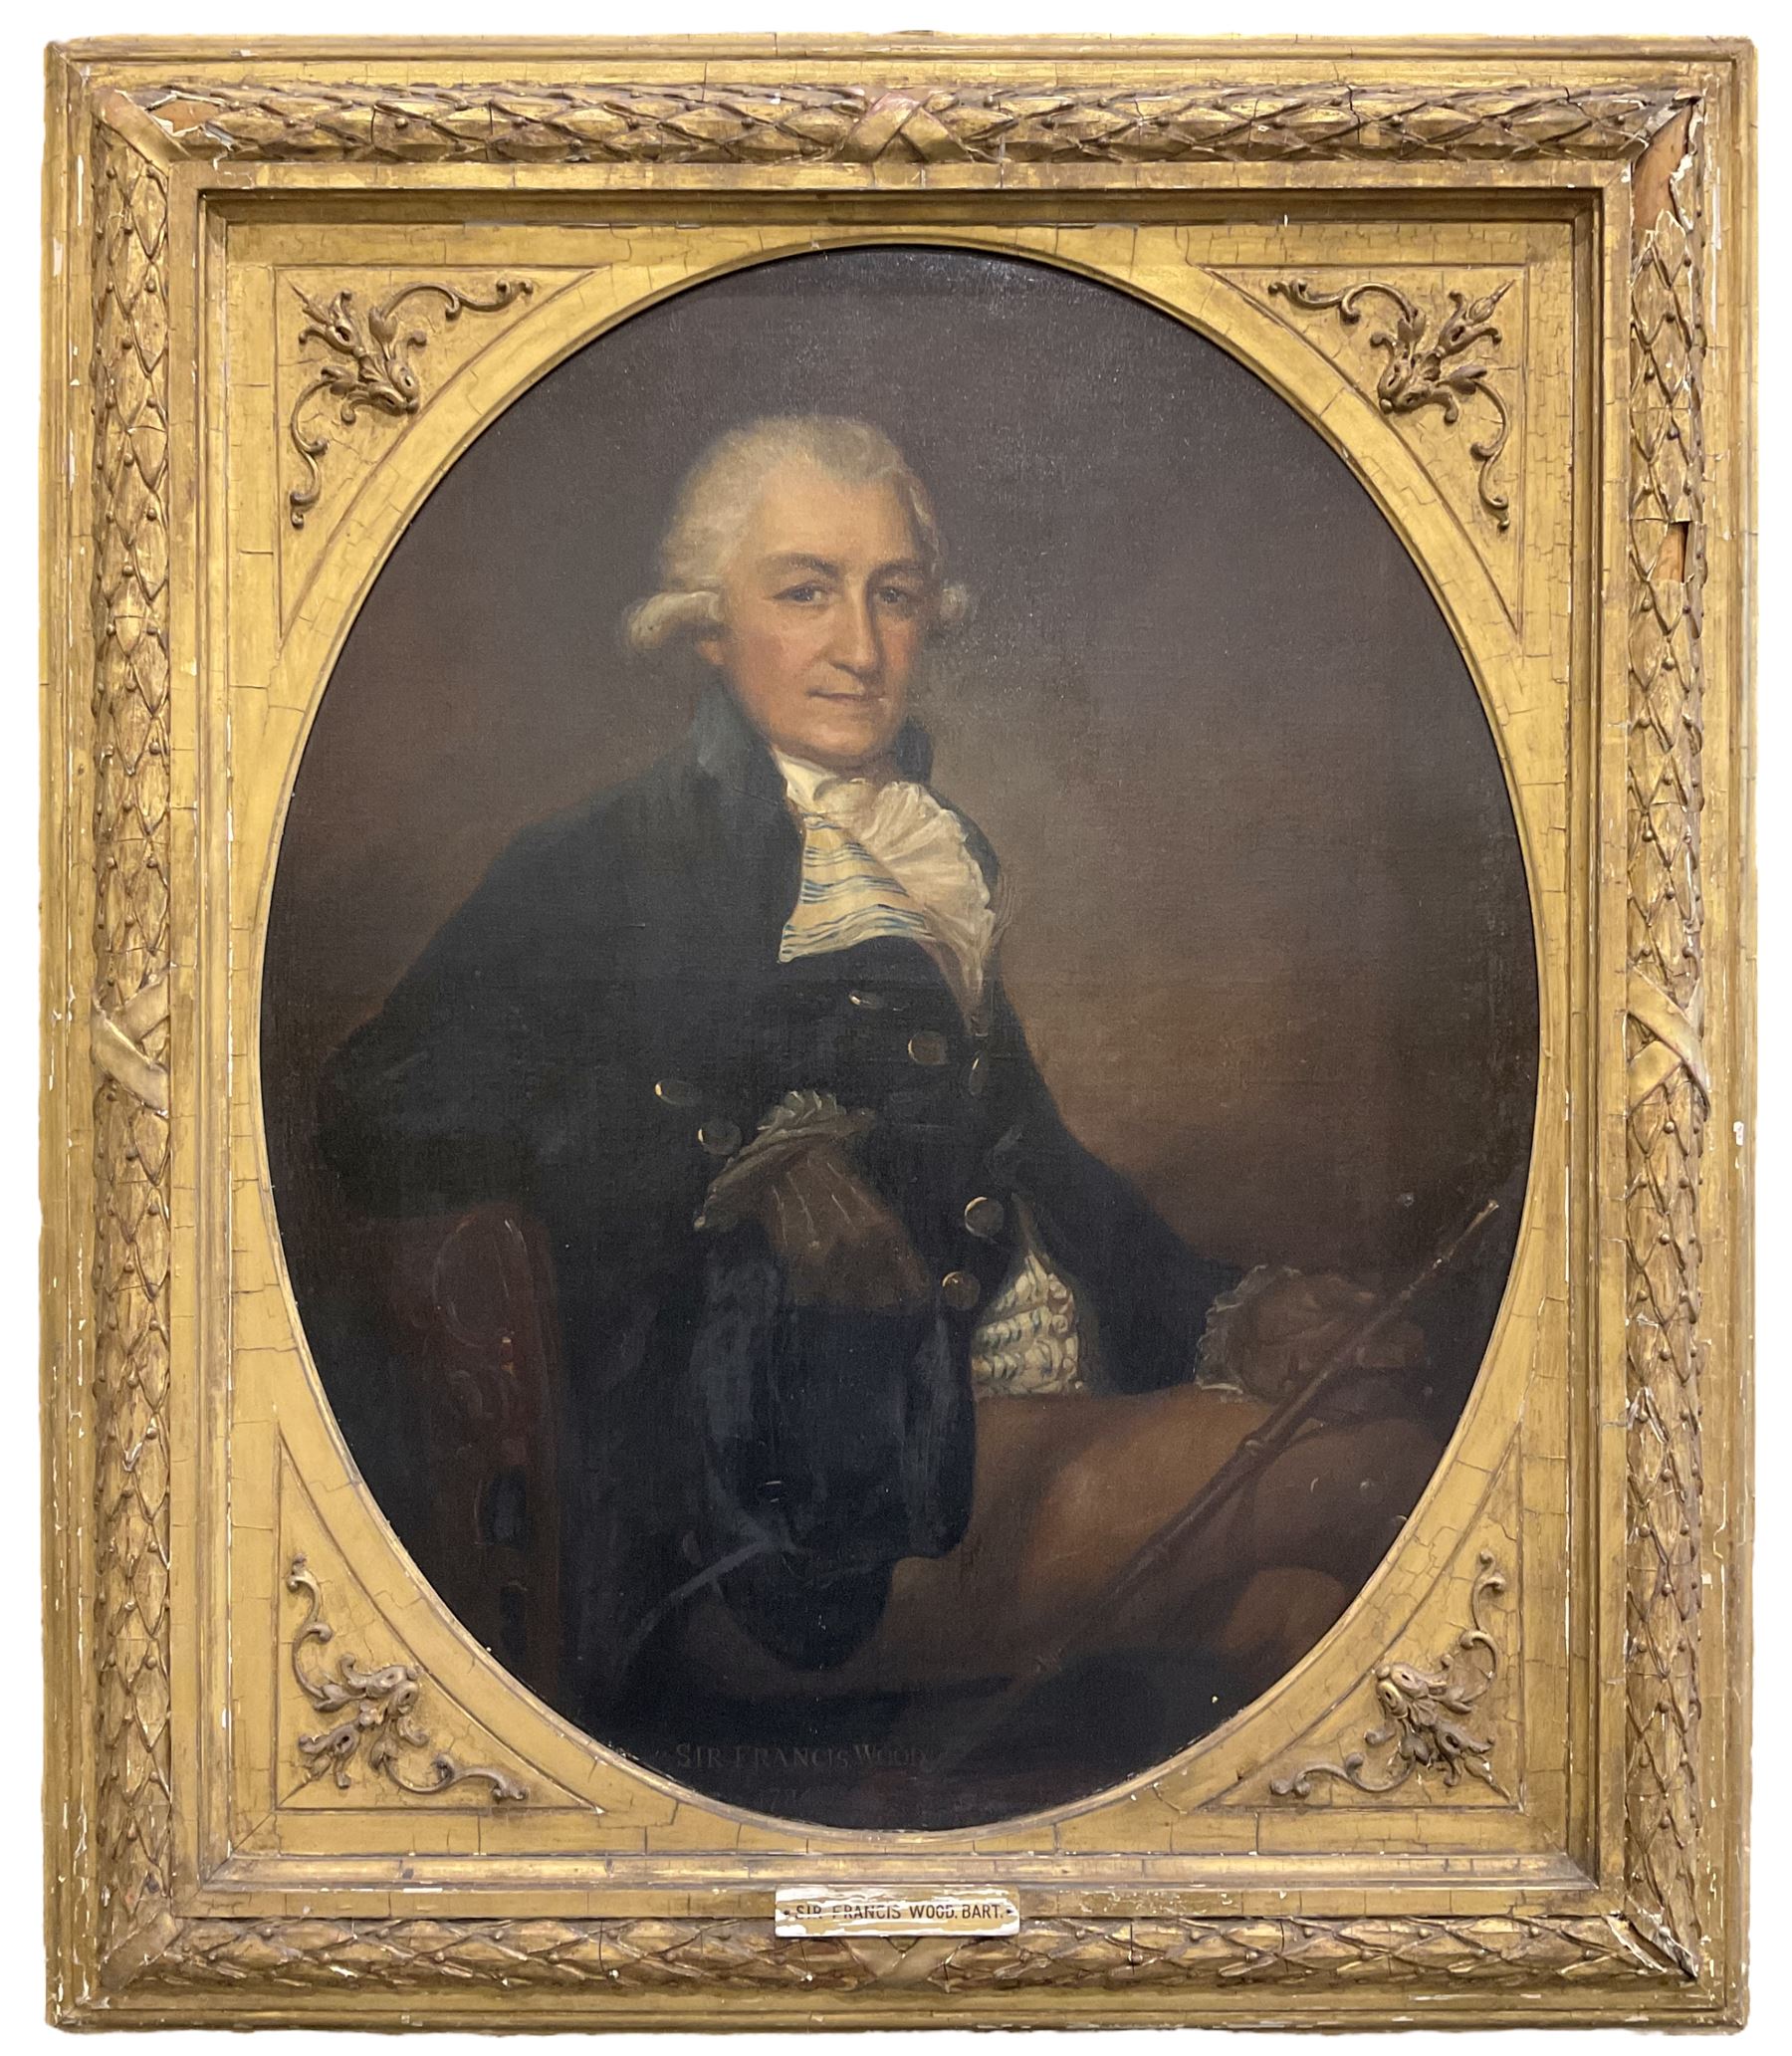 English School (18th century): Portrait of 'Sir Francis Wood Bt.' Seated Three Quarter Length with B - Image 2 of 4